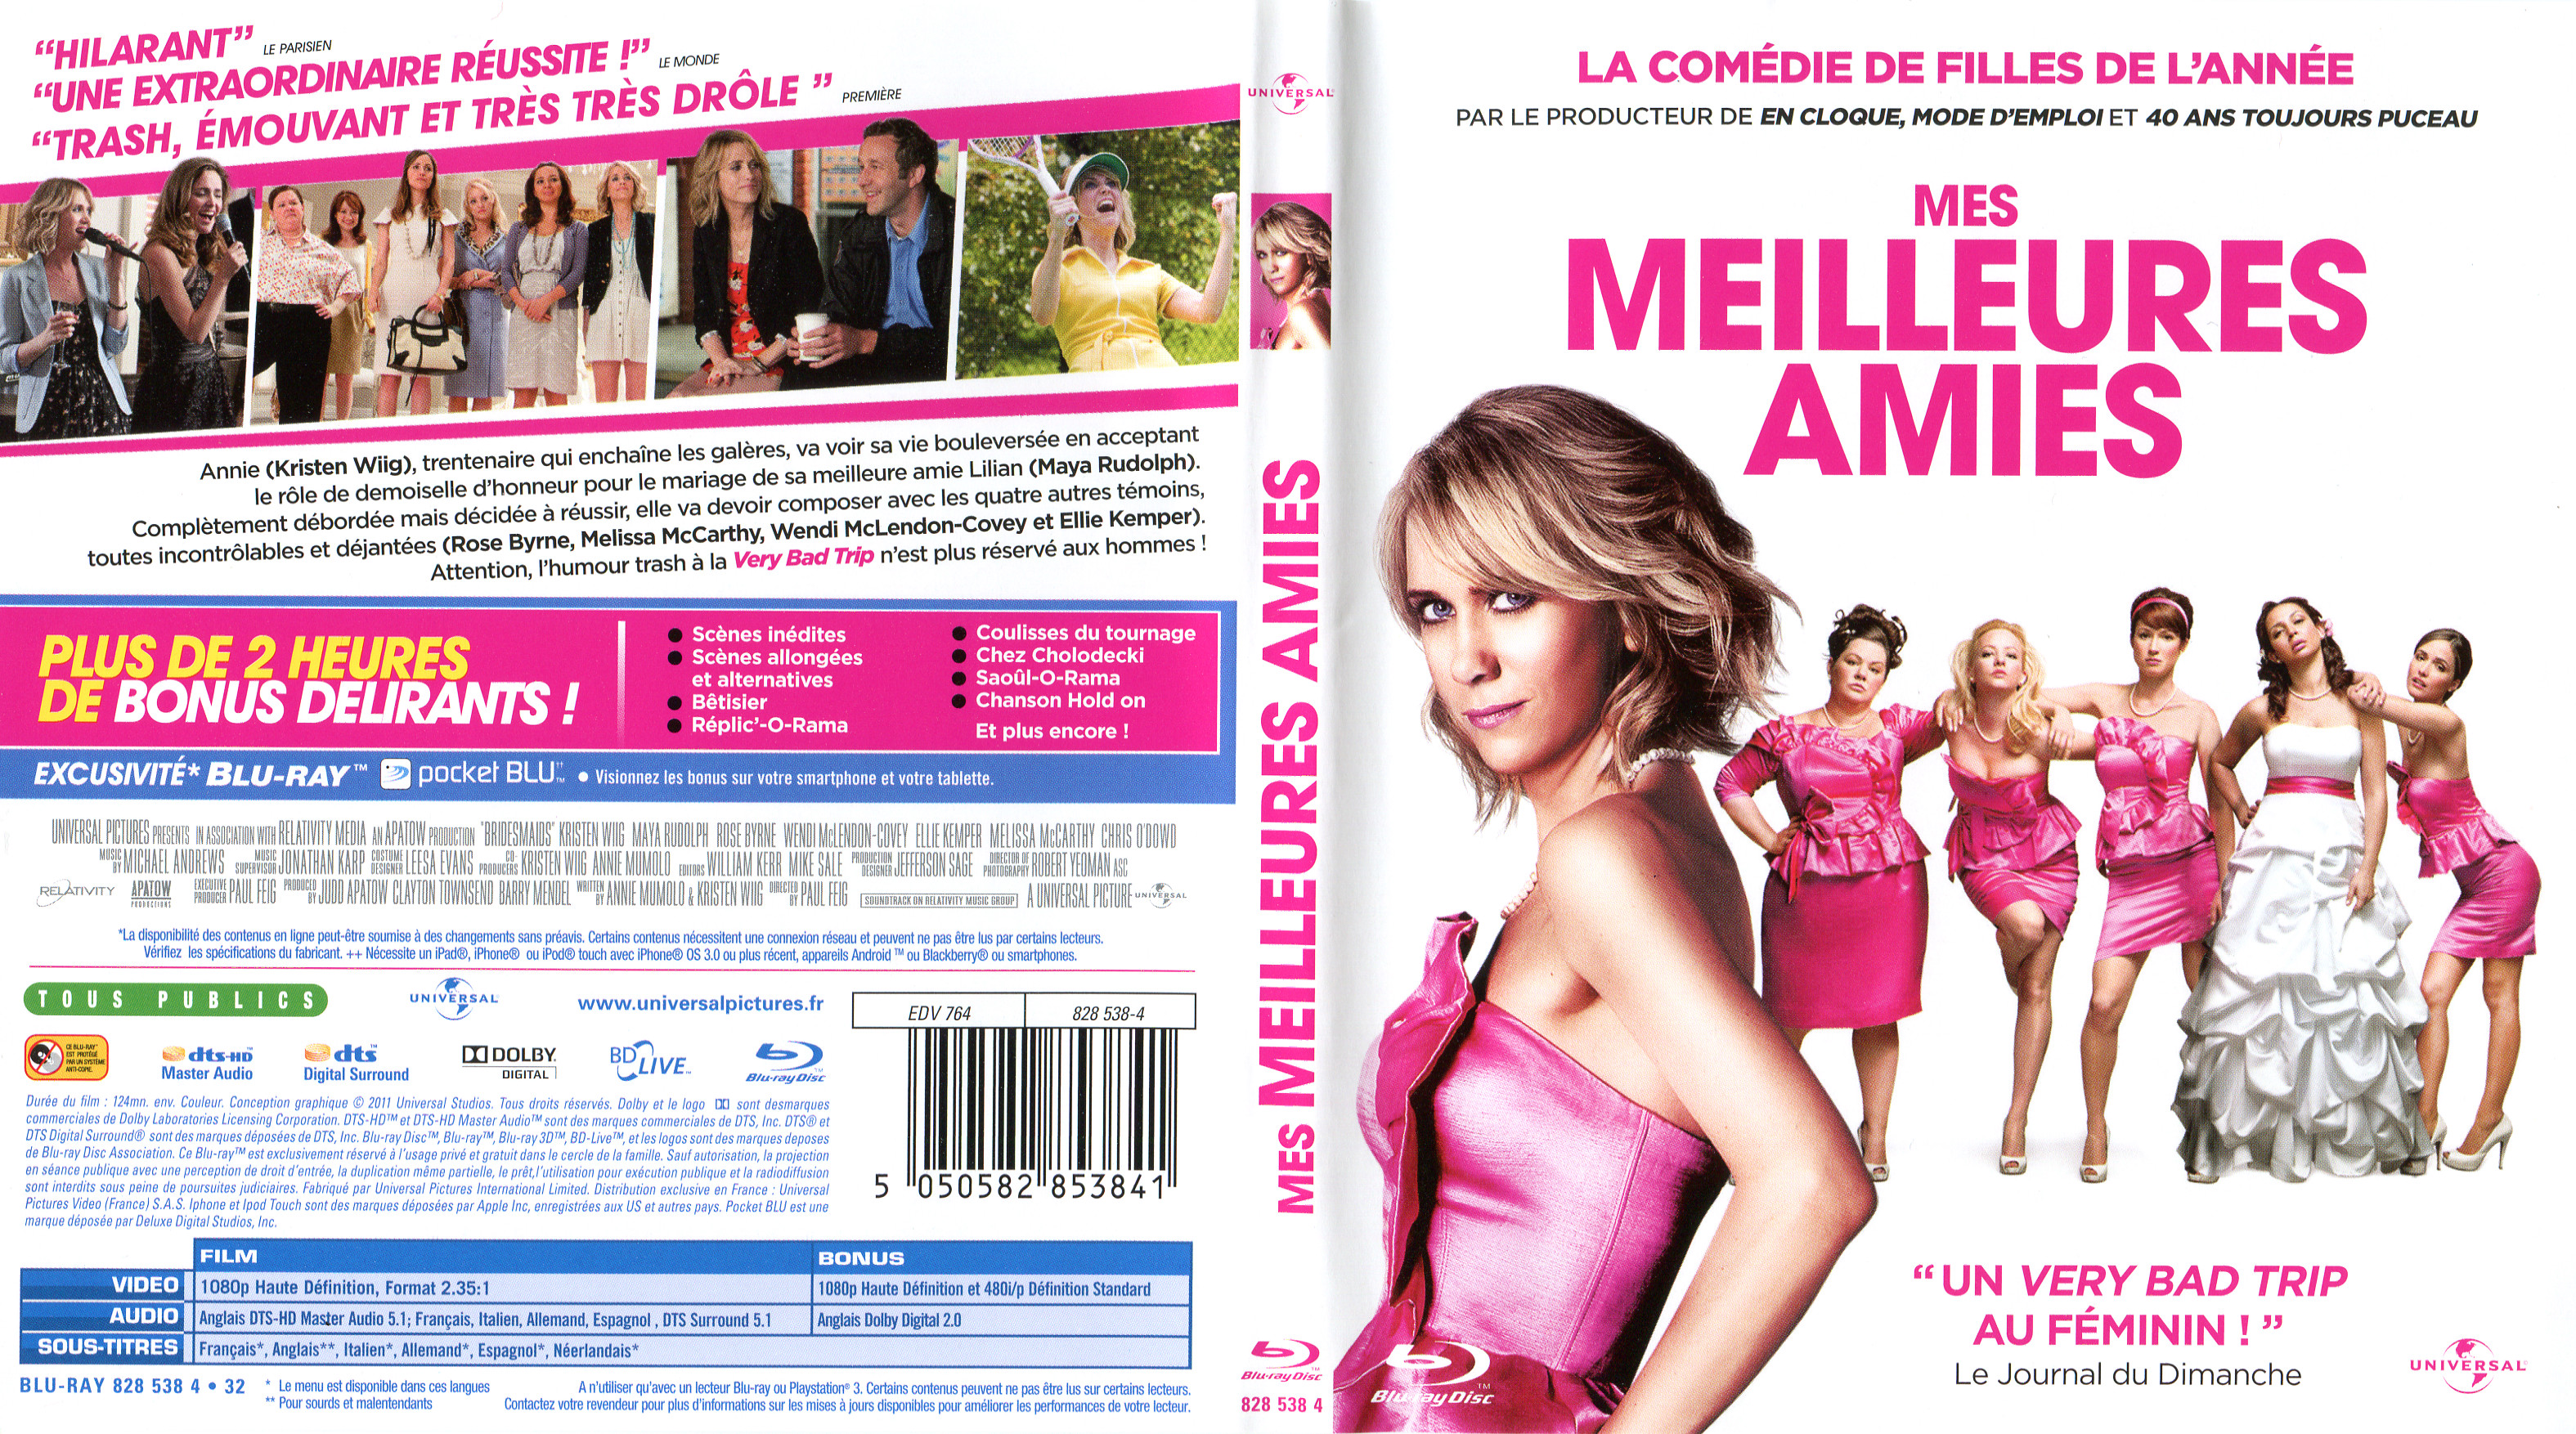 Jaquette DVD Mes meilleures amies (BLU-RAY) v2